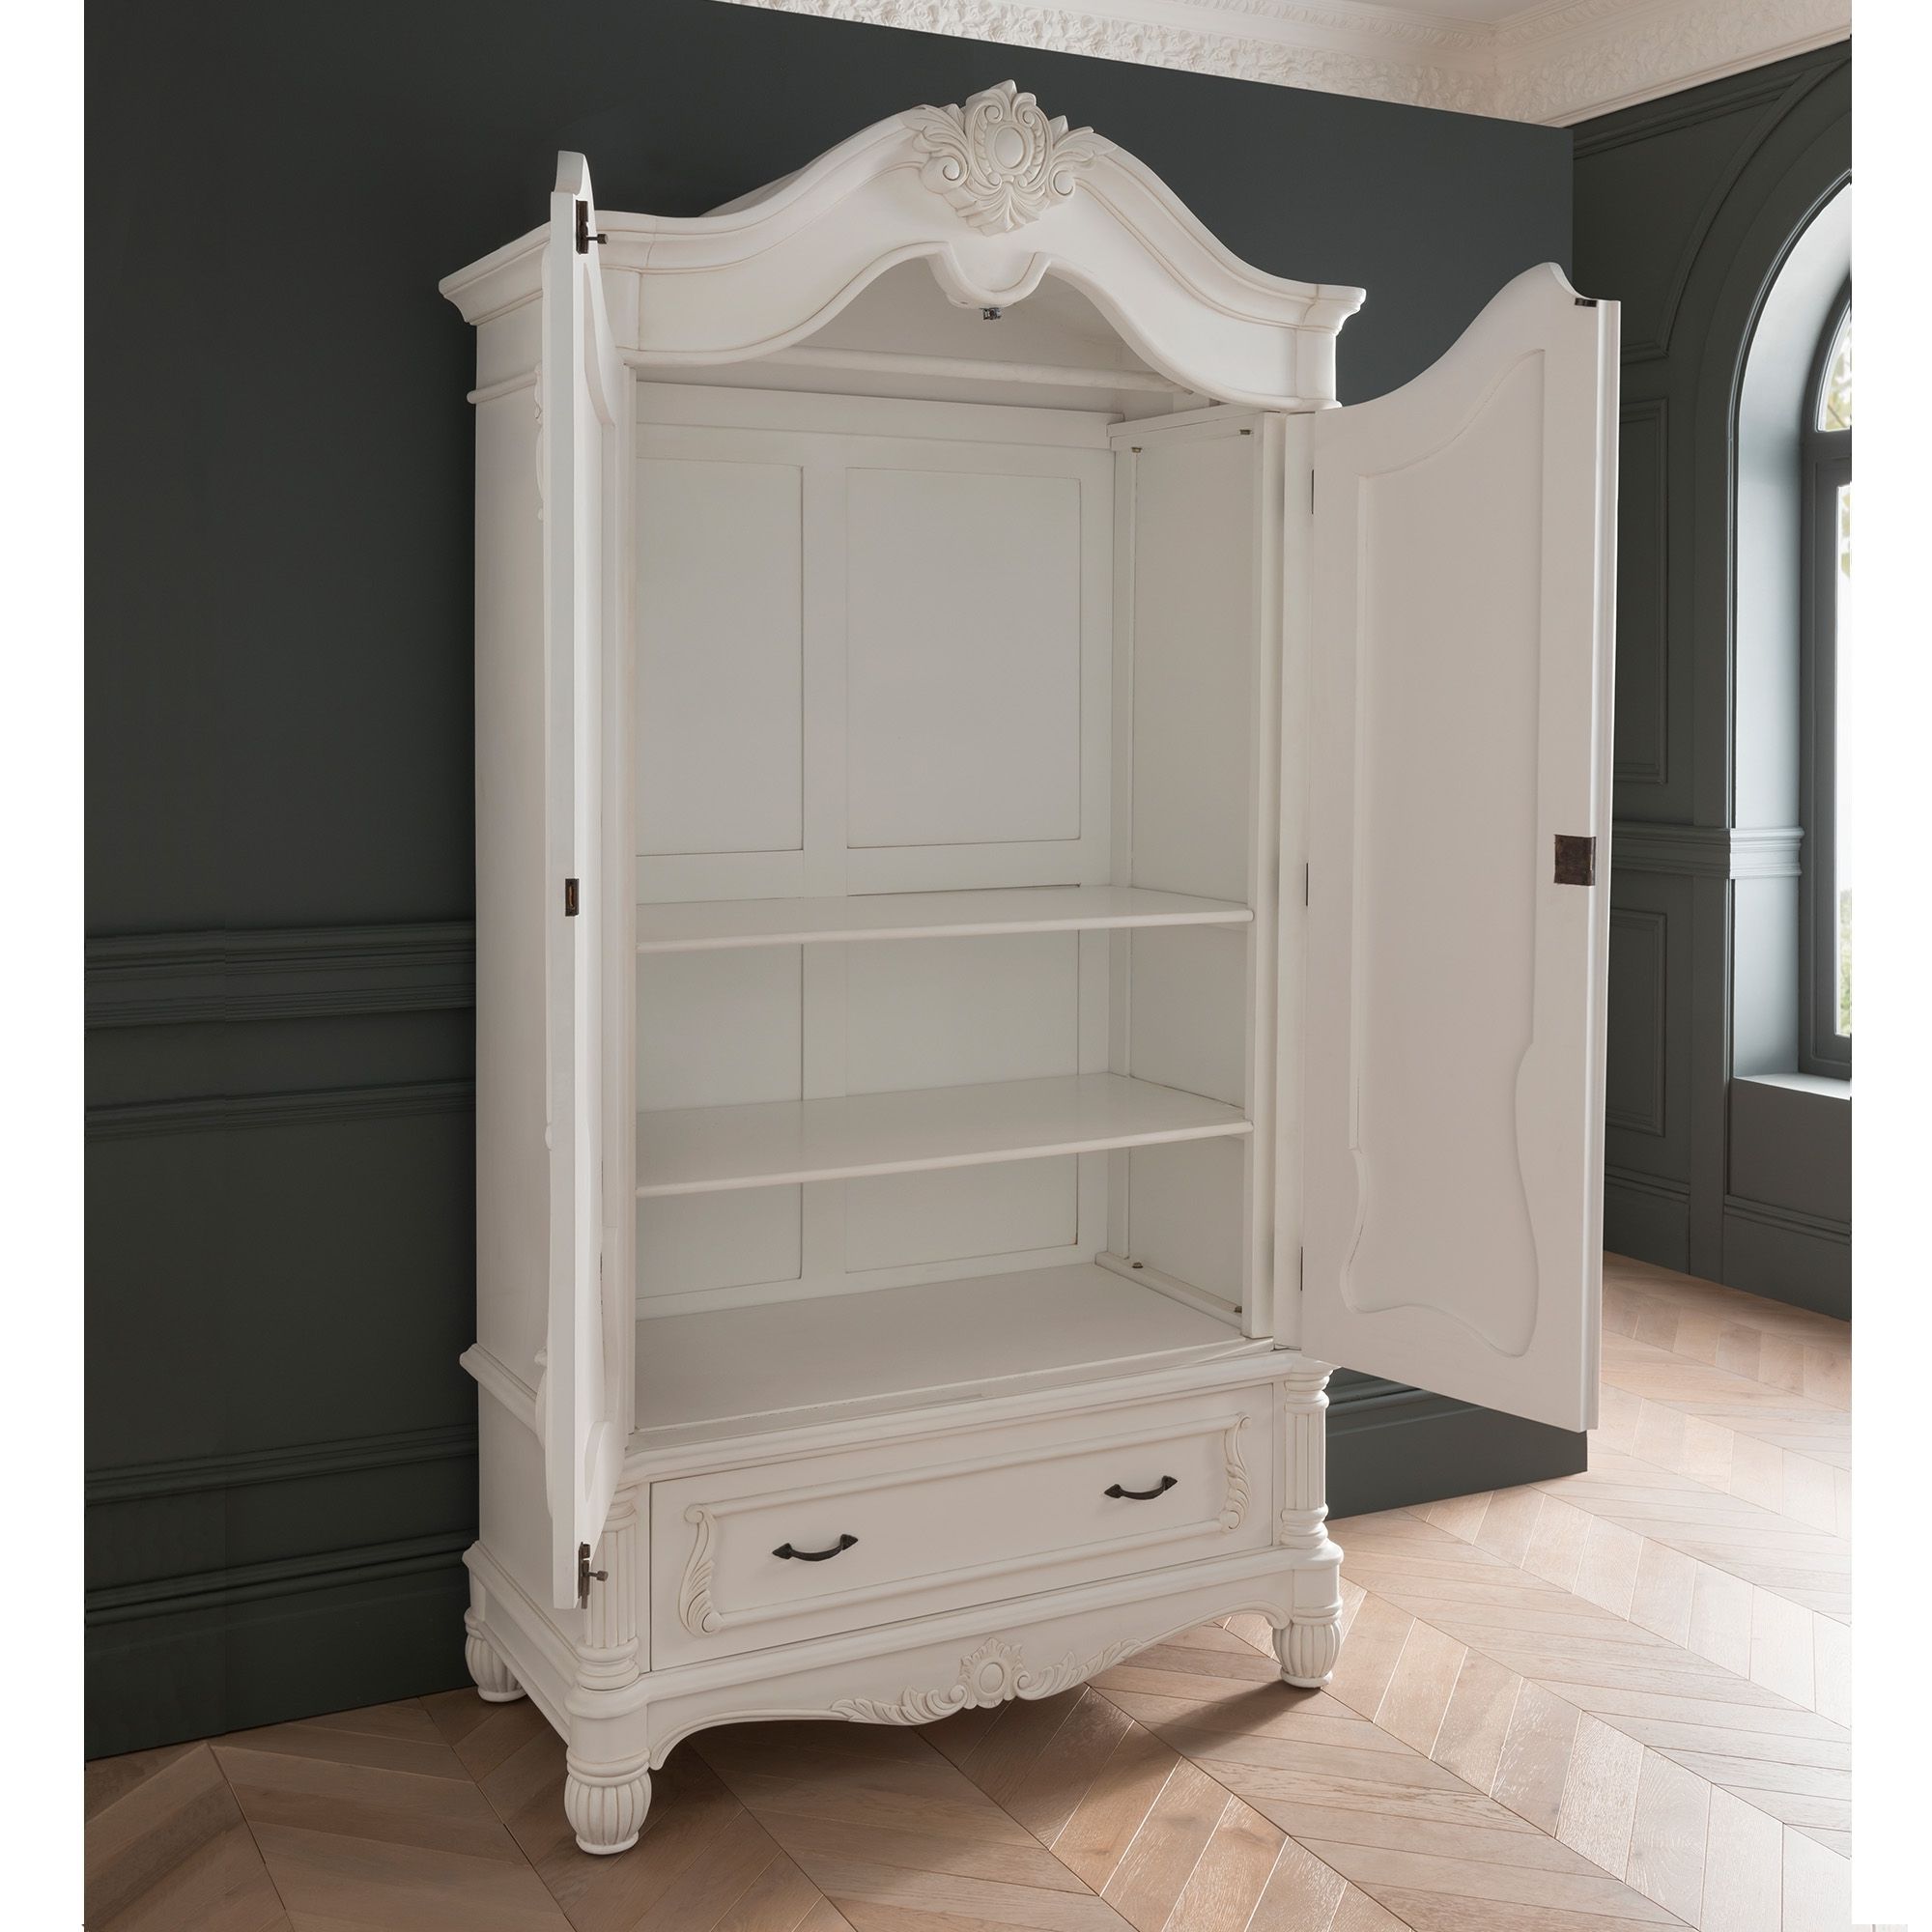 Antique French Style White Finished 1 Drawer Wardrobe | Homesdirect365 Within White Antique Wardrobes (View 16 of 20)